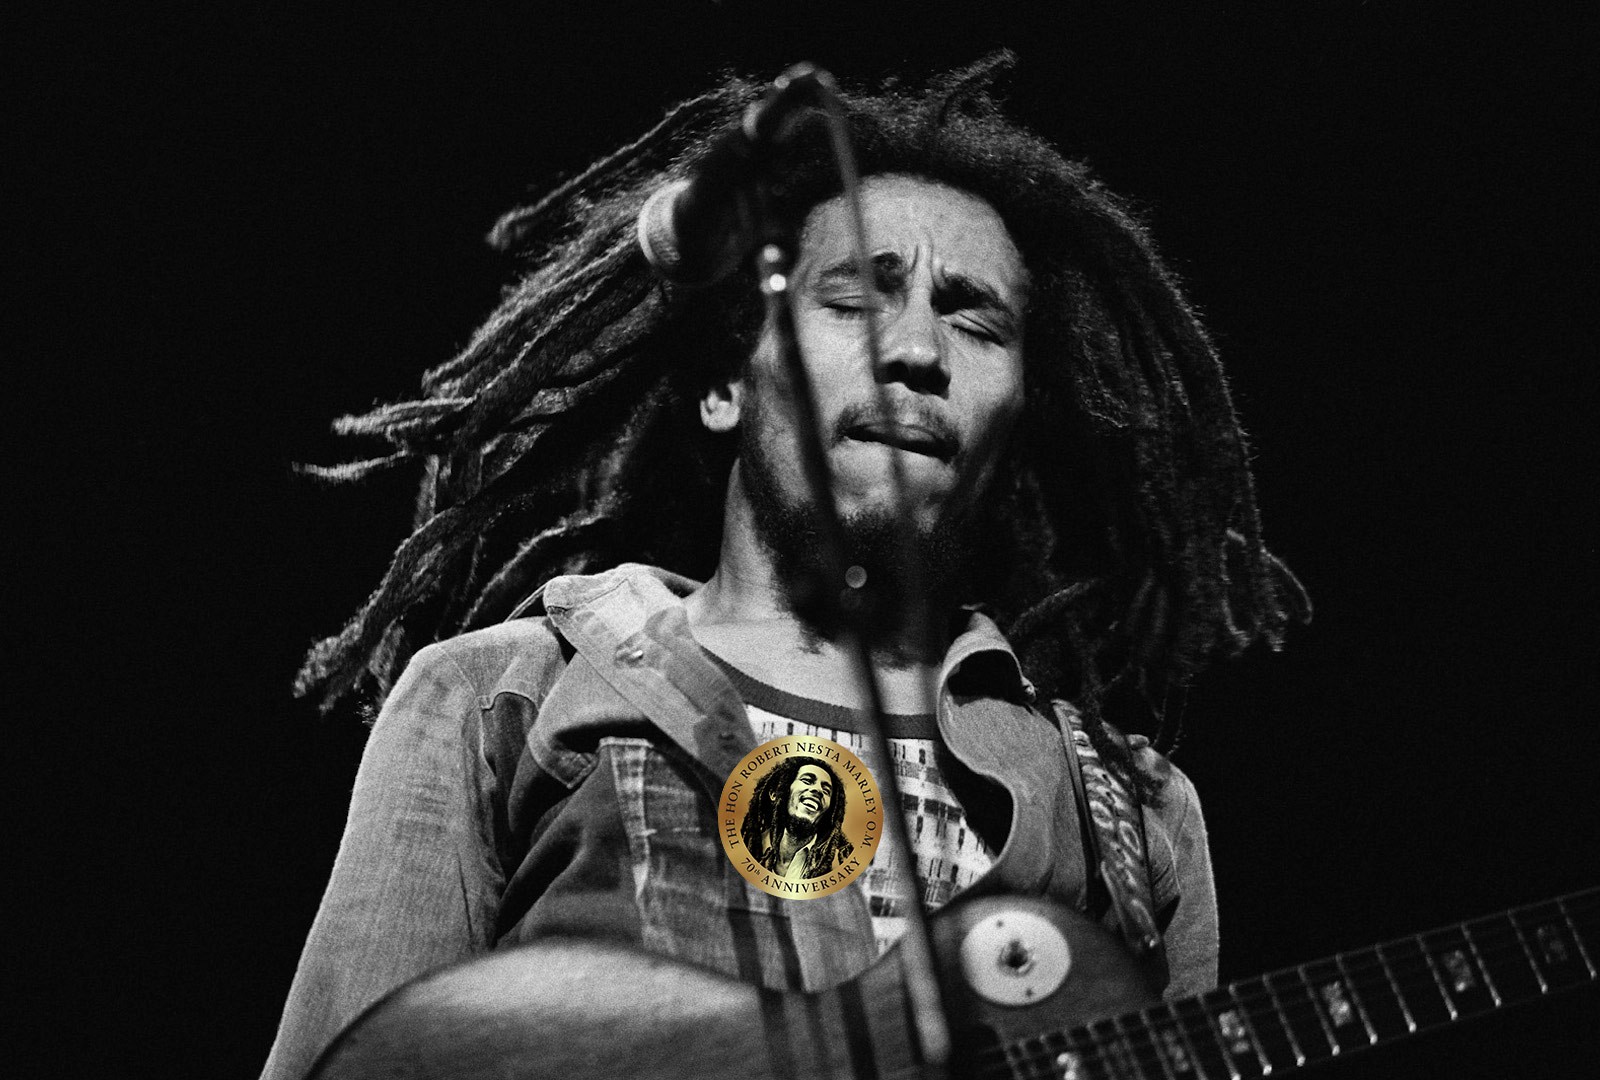 Bob Marley Backgrounds, Compatible - PC, Mobile, Gadgets| 1600x1080 px